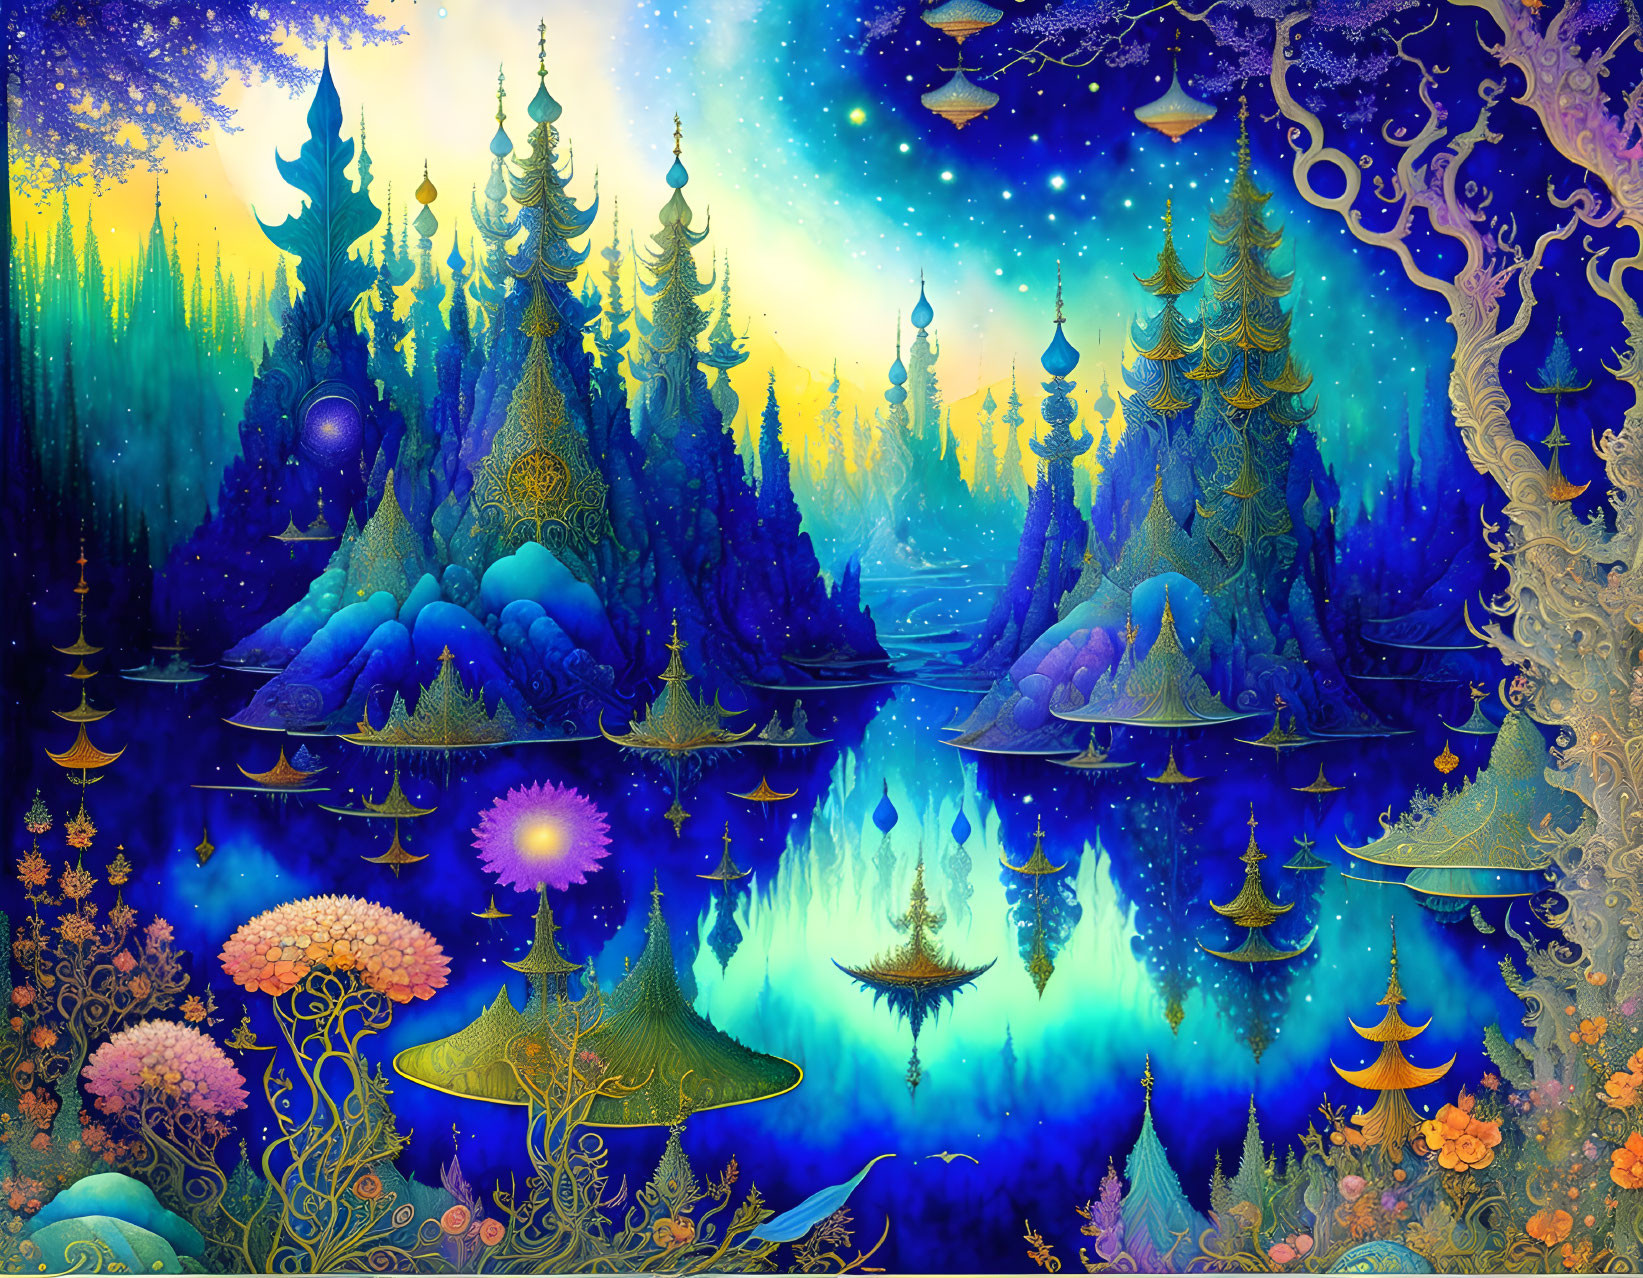 Fantastical landscape with luminescent trees, floating islands, reflective lake